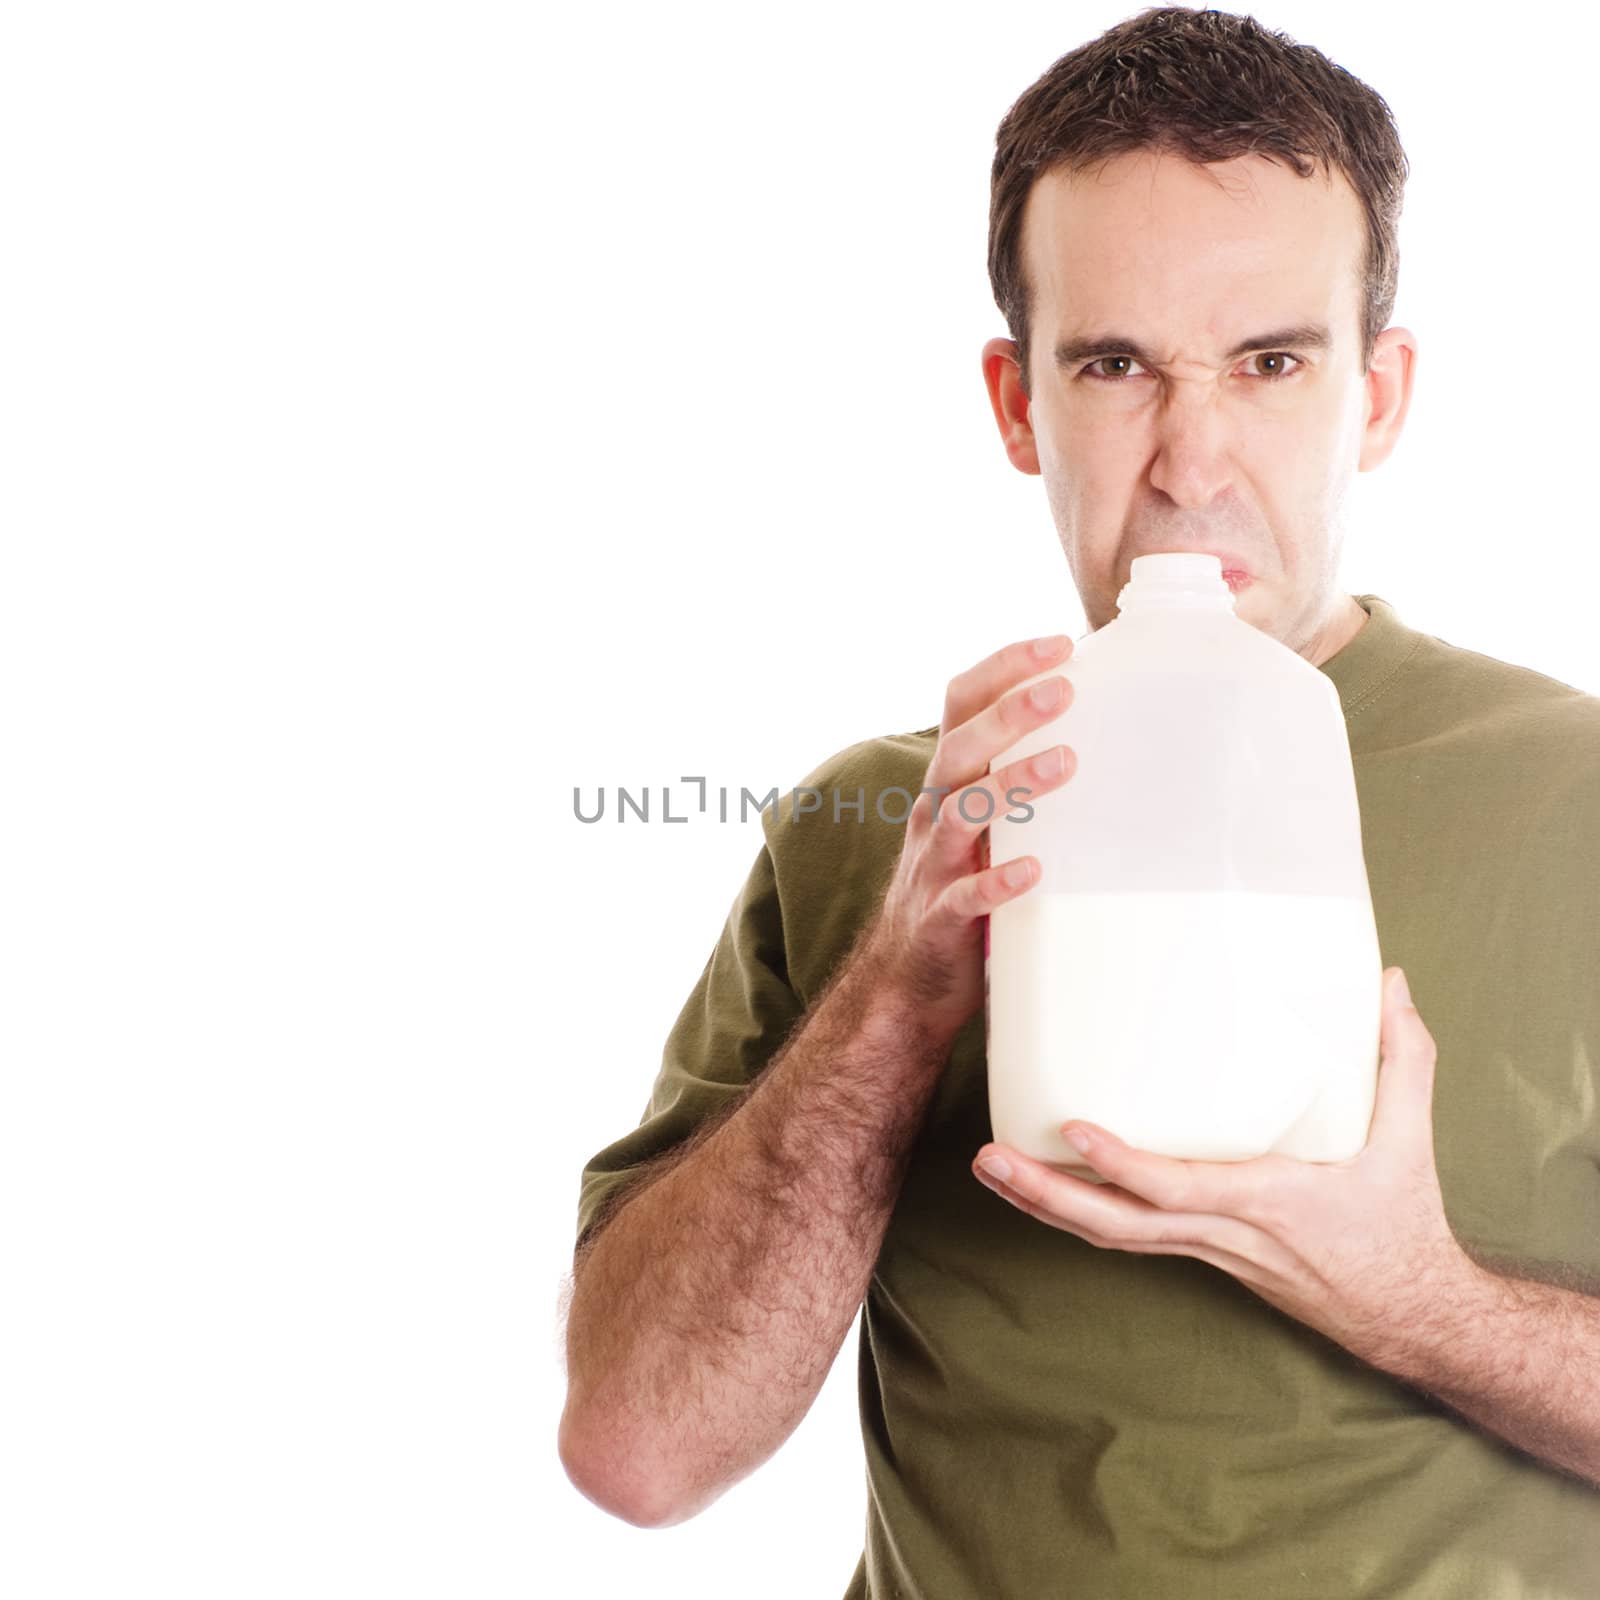 A young man smelling a container of spoiled milk, isolated against a white background